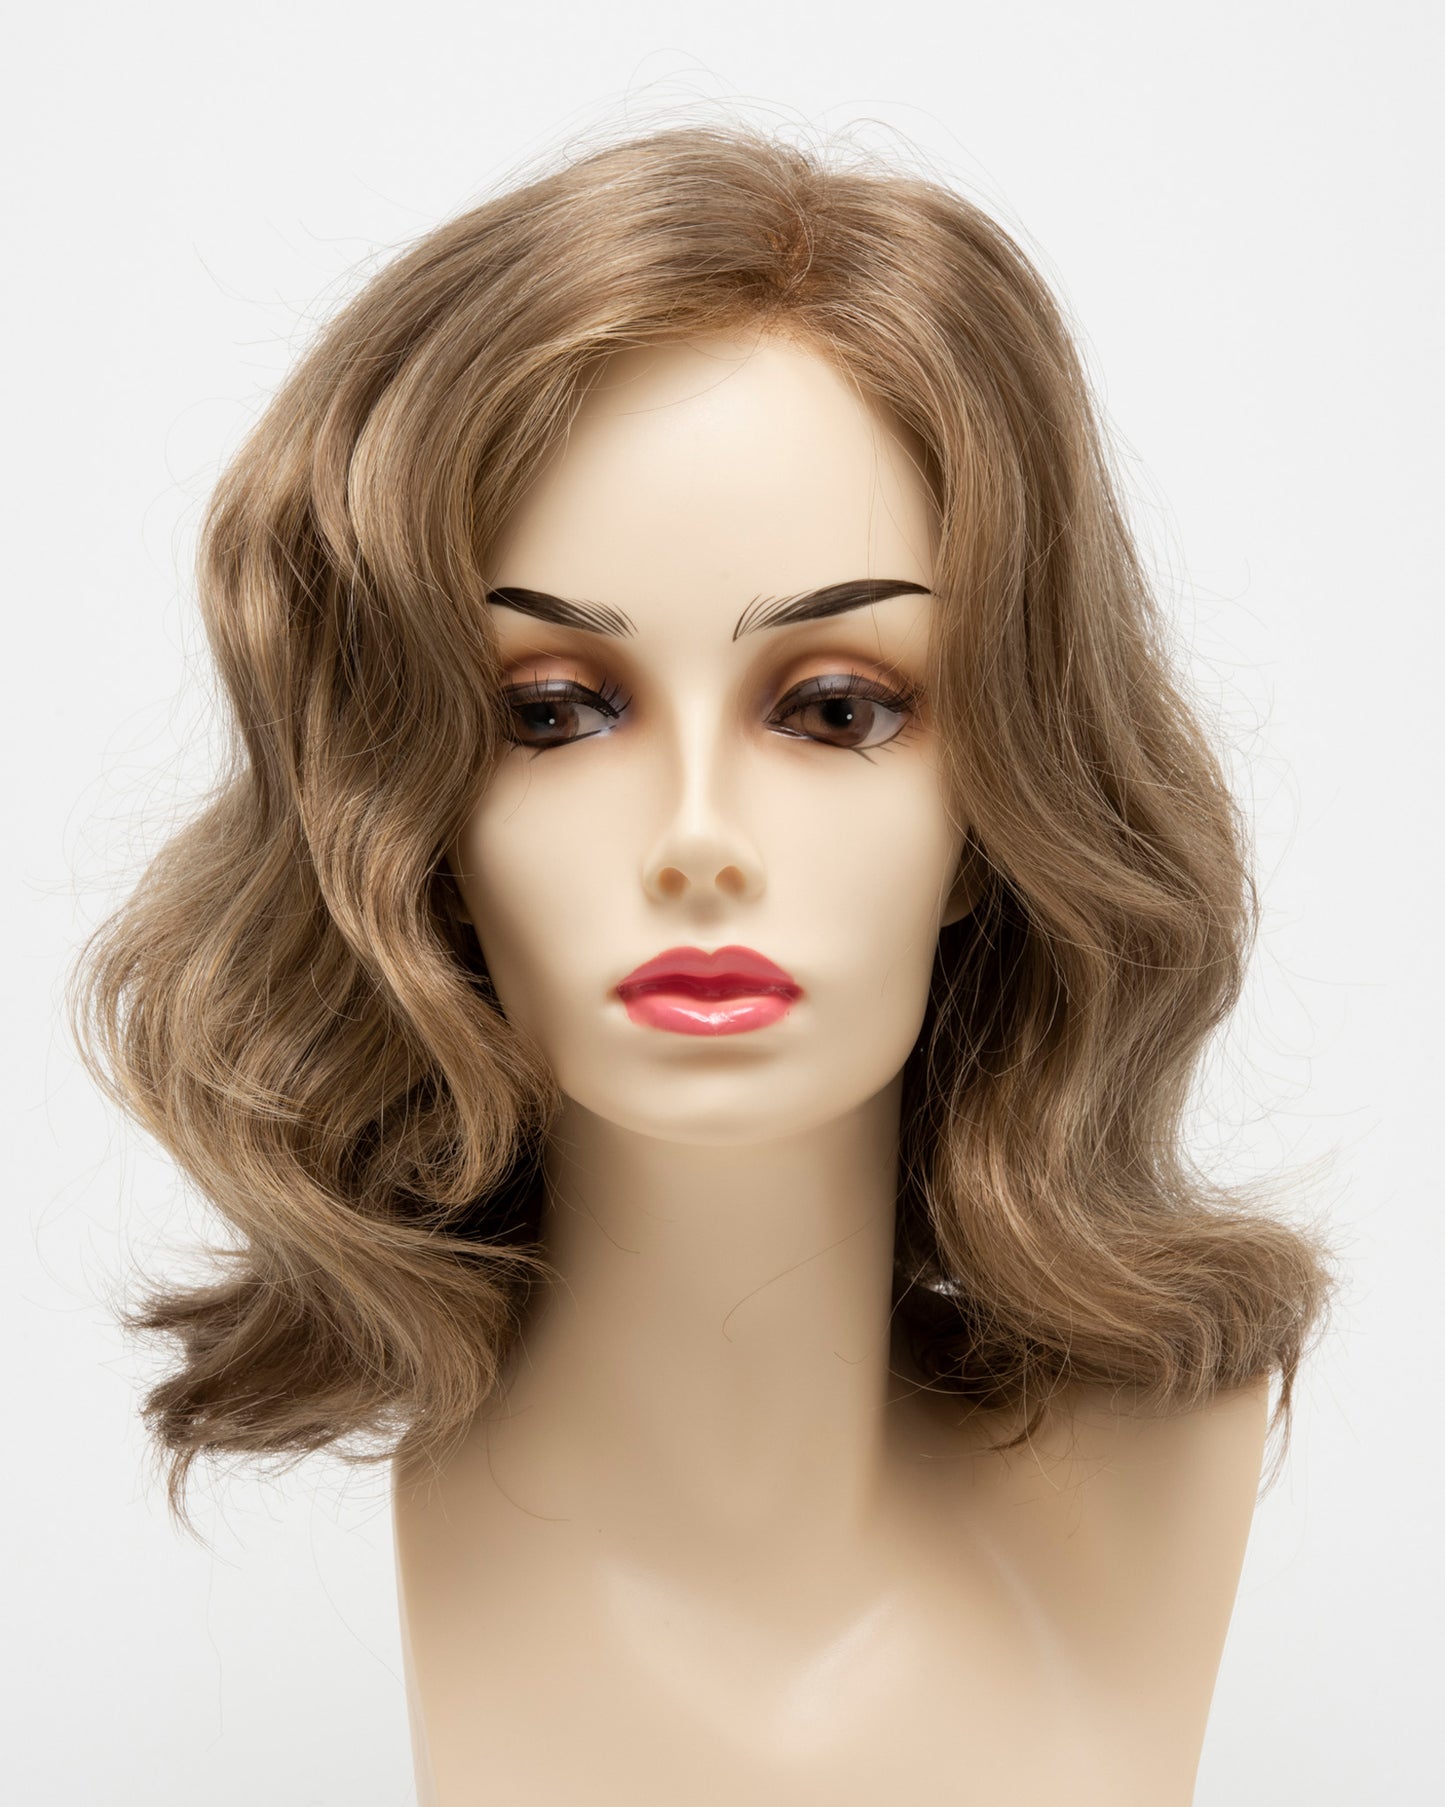 BRITTANEY - Lace Front Monofilament Top Synthetic Wig